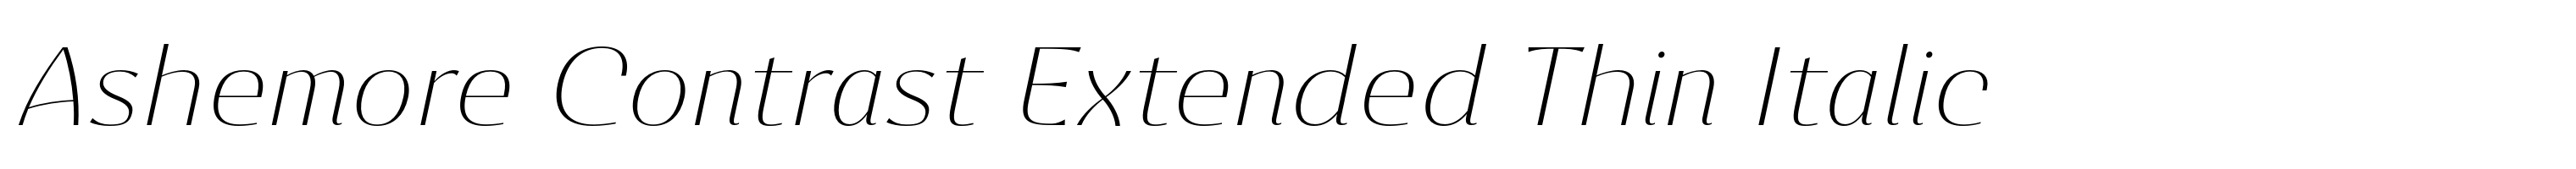 Ashemore Contrast Extended Thin Italic